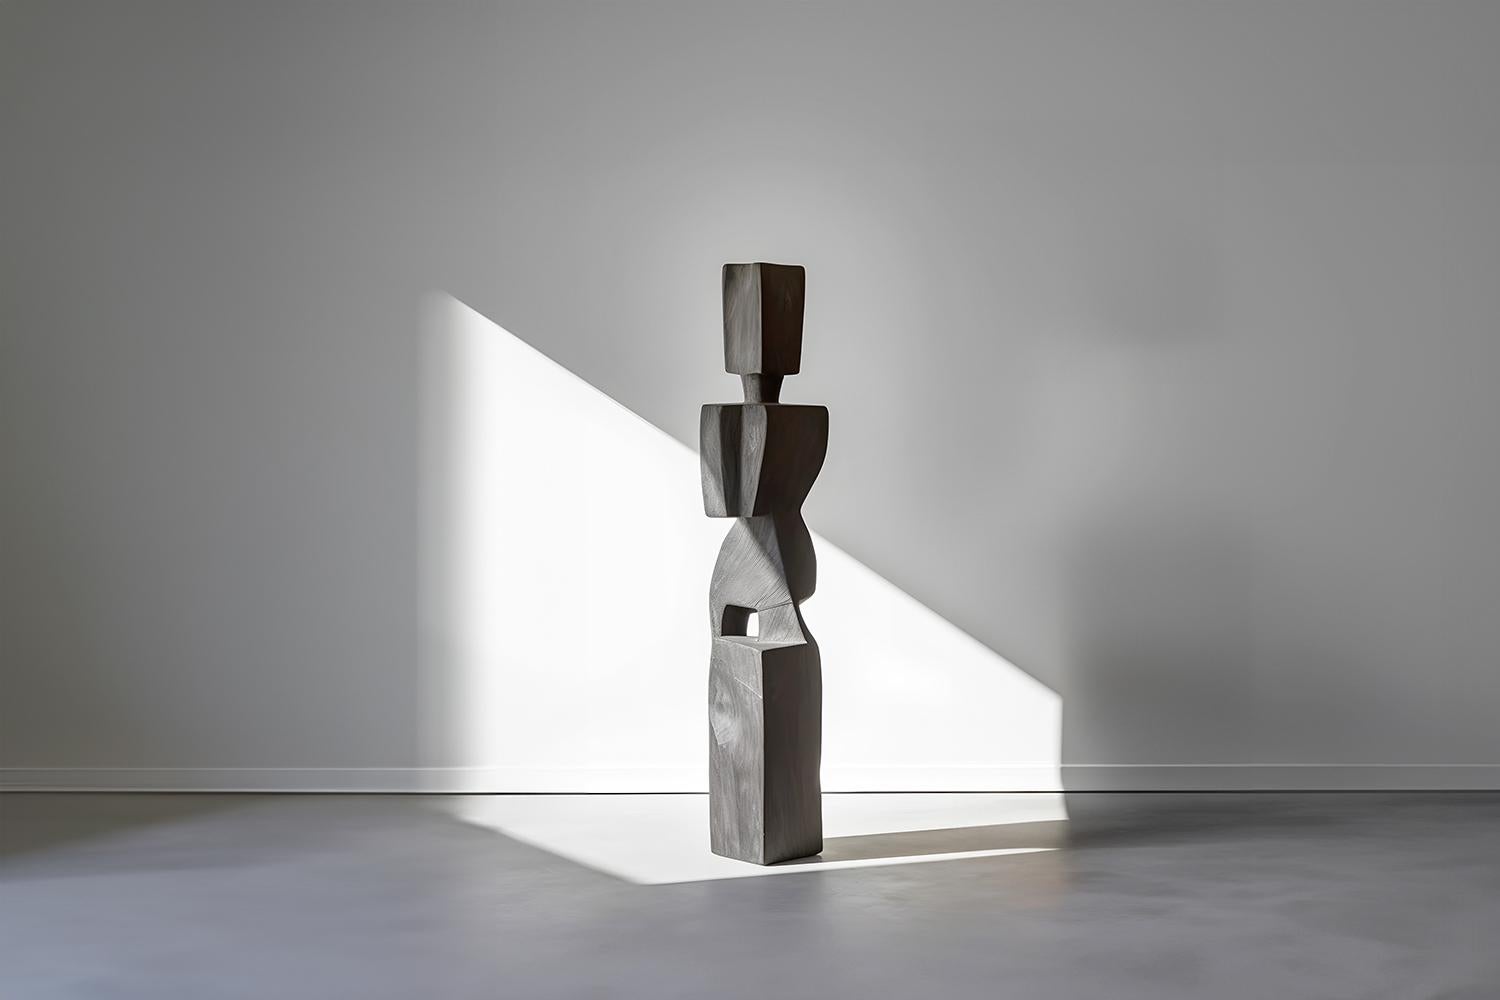 Hand-Crafted Monumental Wooden Sculpture Inspired in Constantin Brancusi, Unseen Force 24 For Sale